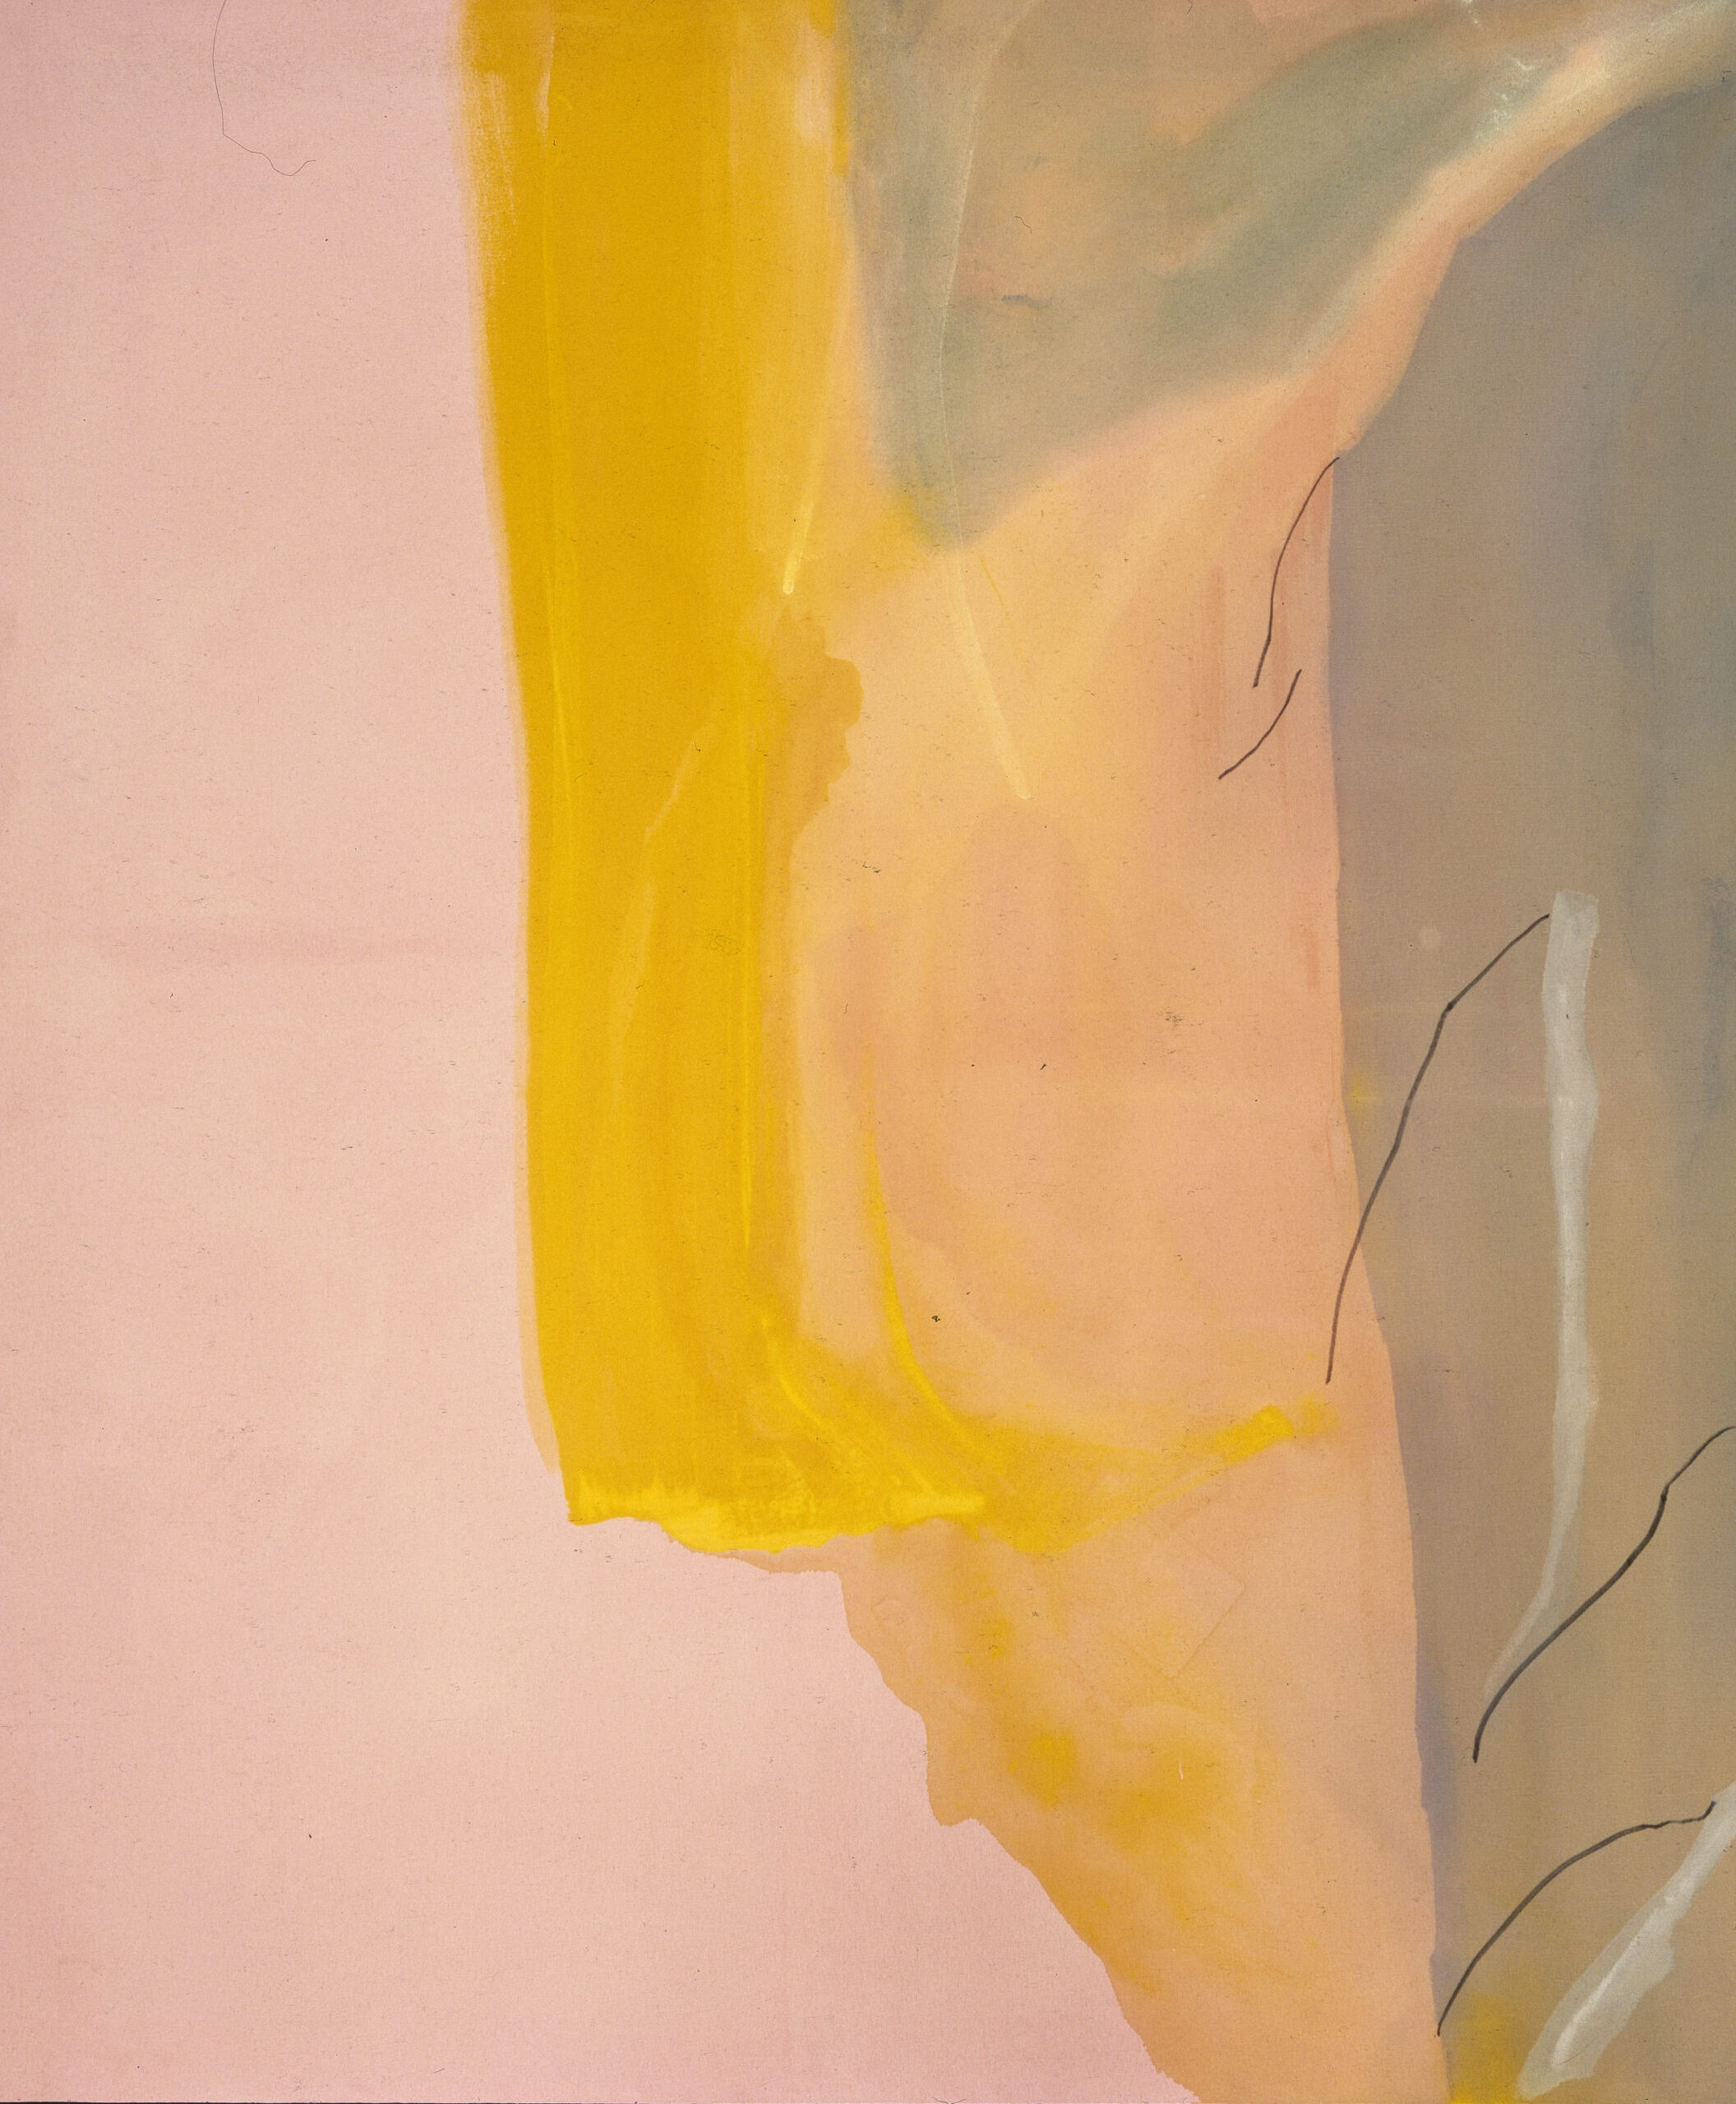 Large vertical painting in minimalist style features thinned pigments poured in translucent layers onto the unsized canvas. The abstract composition is dominated by a central ambiguous form in vibrant yellow-orange and peach, flanked by amorphous swaths of pale pink and a dark gray.